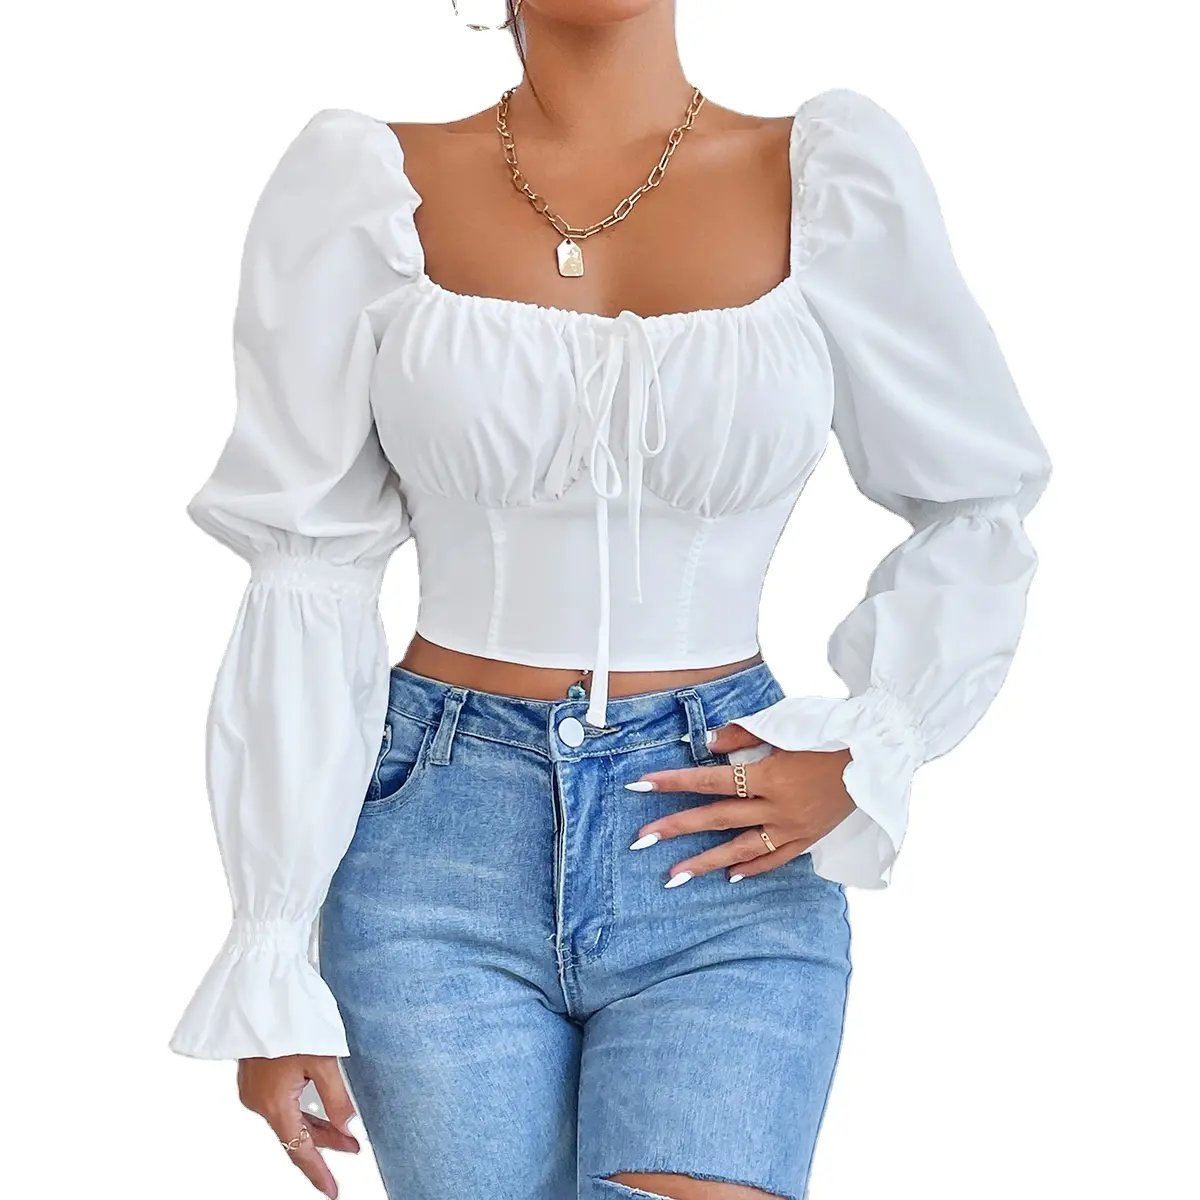 Solid White Bandage Long Sleeve Crop Top Square Collar T-Shirt Women Autumn Fashion Backless Skinny Blouse Lady Casual wear